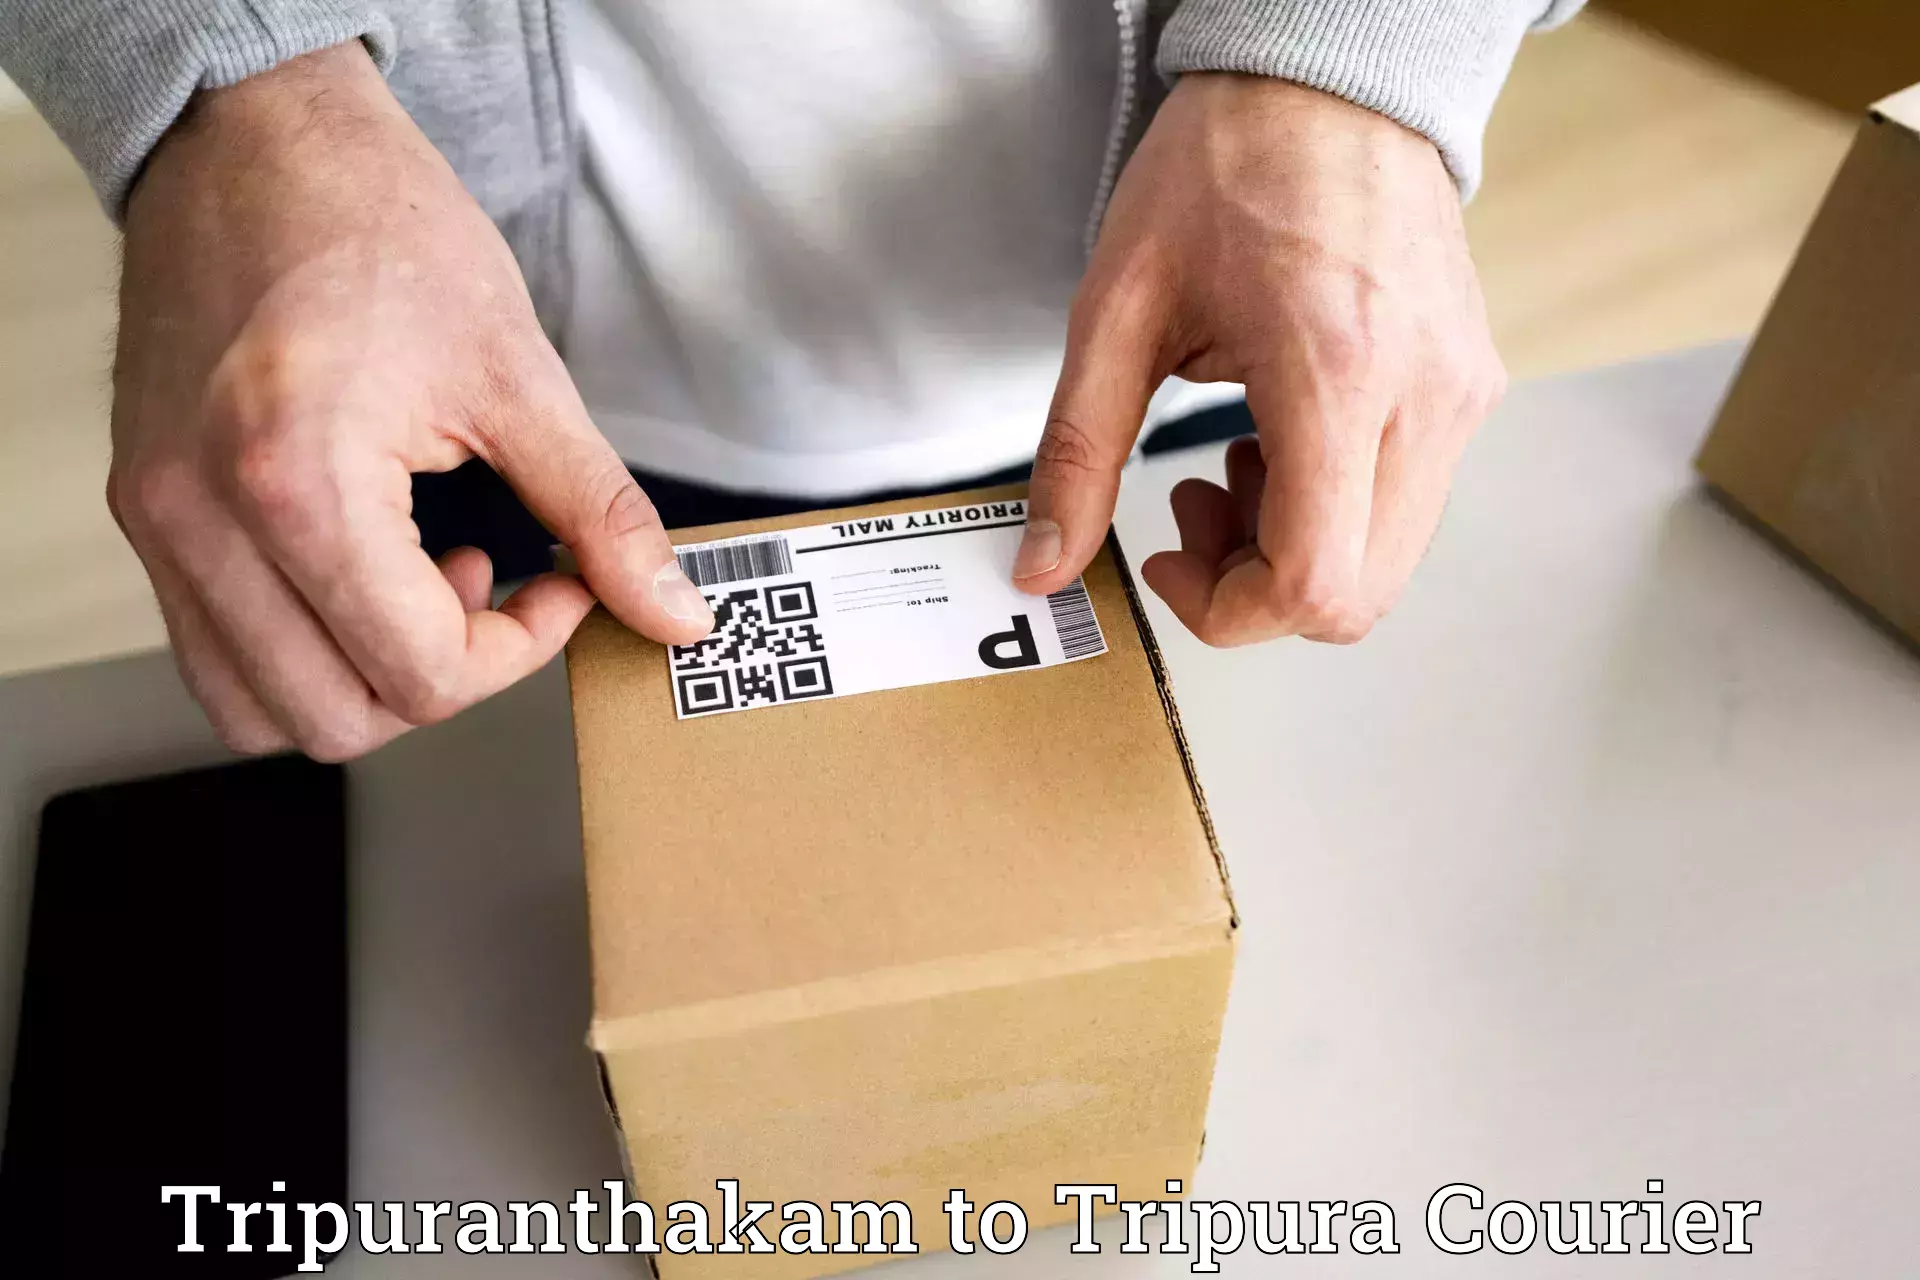 Next day courier in Tripuranthakam to Agartala